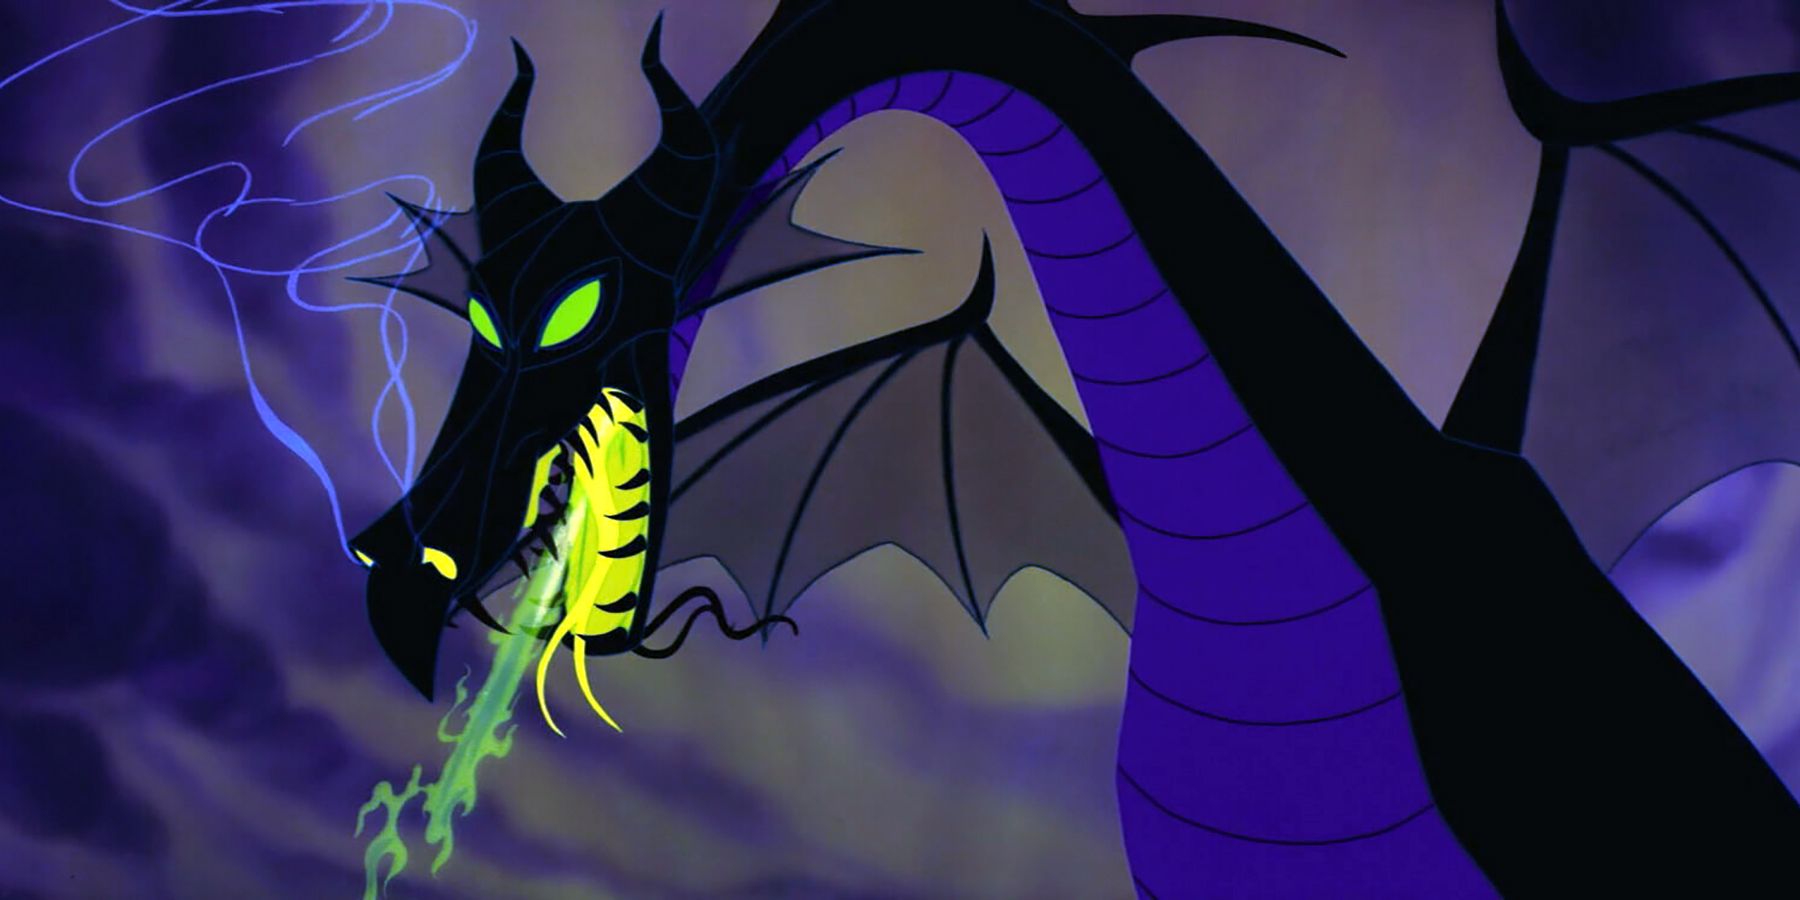 How Maleficent Became Sleeping Beautys Breakout Character